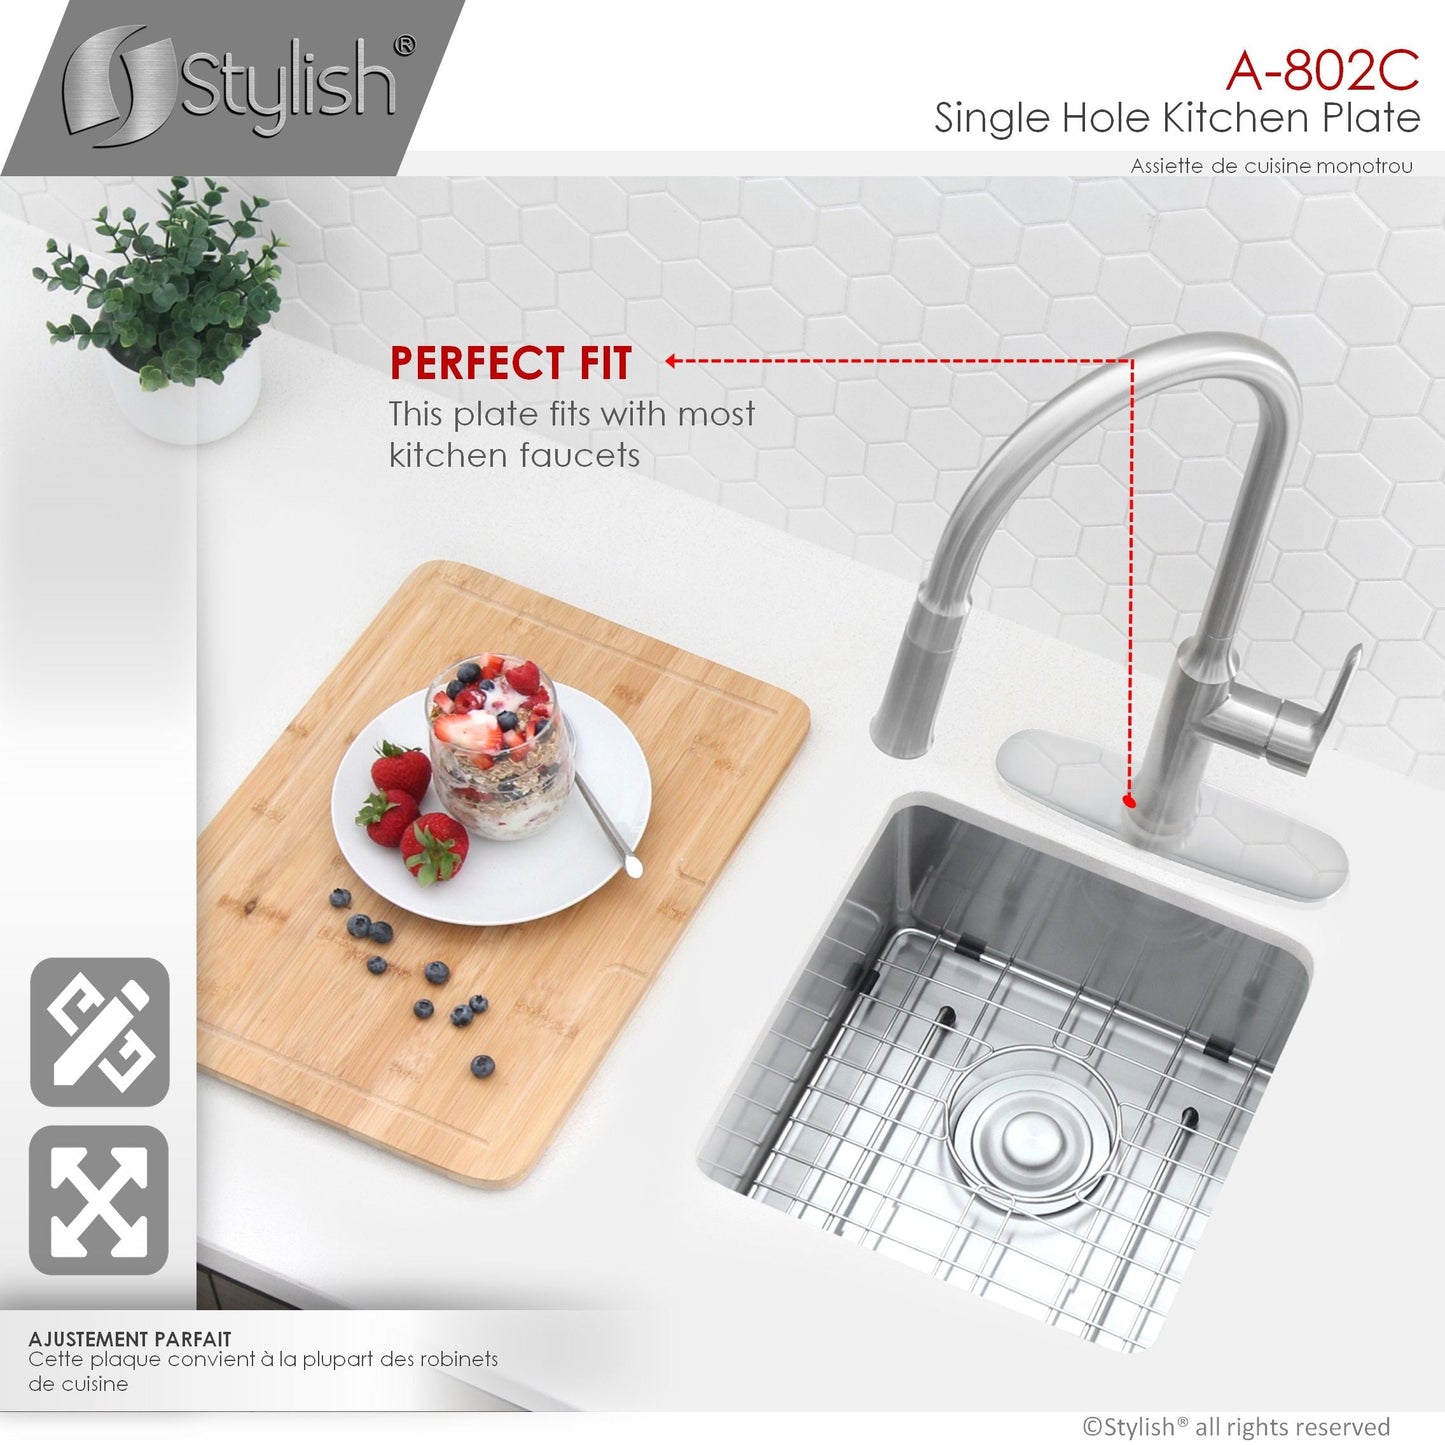 Stylish Kitchen Faucet Plate in Stainless Steel in Polished Chrome Finish A-802C